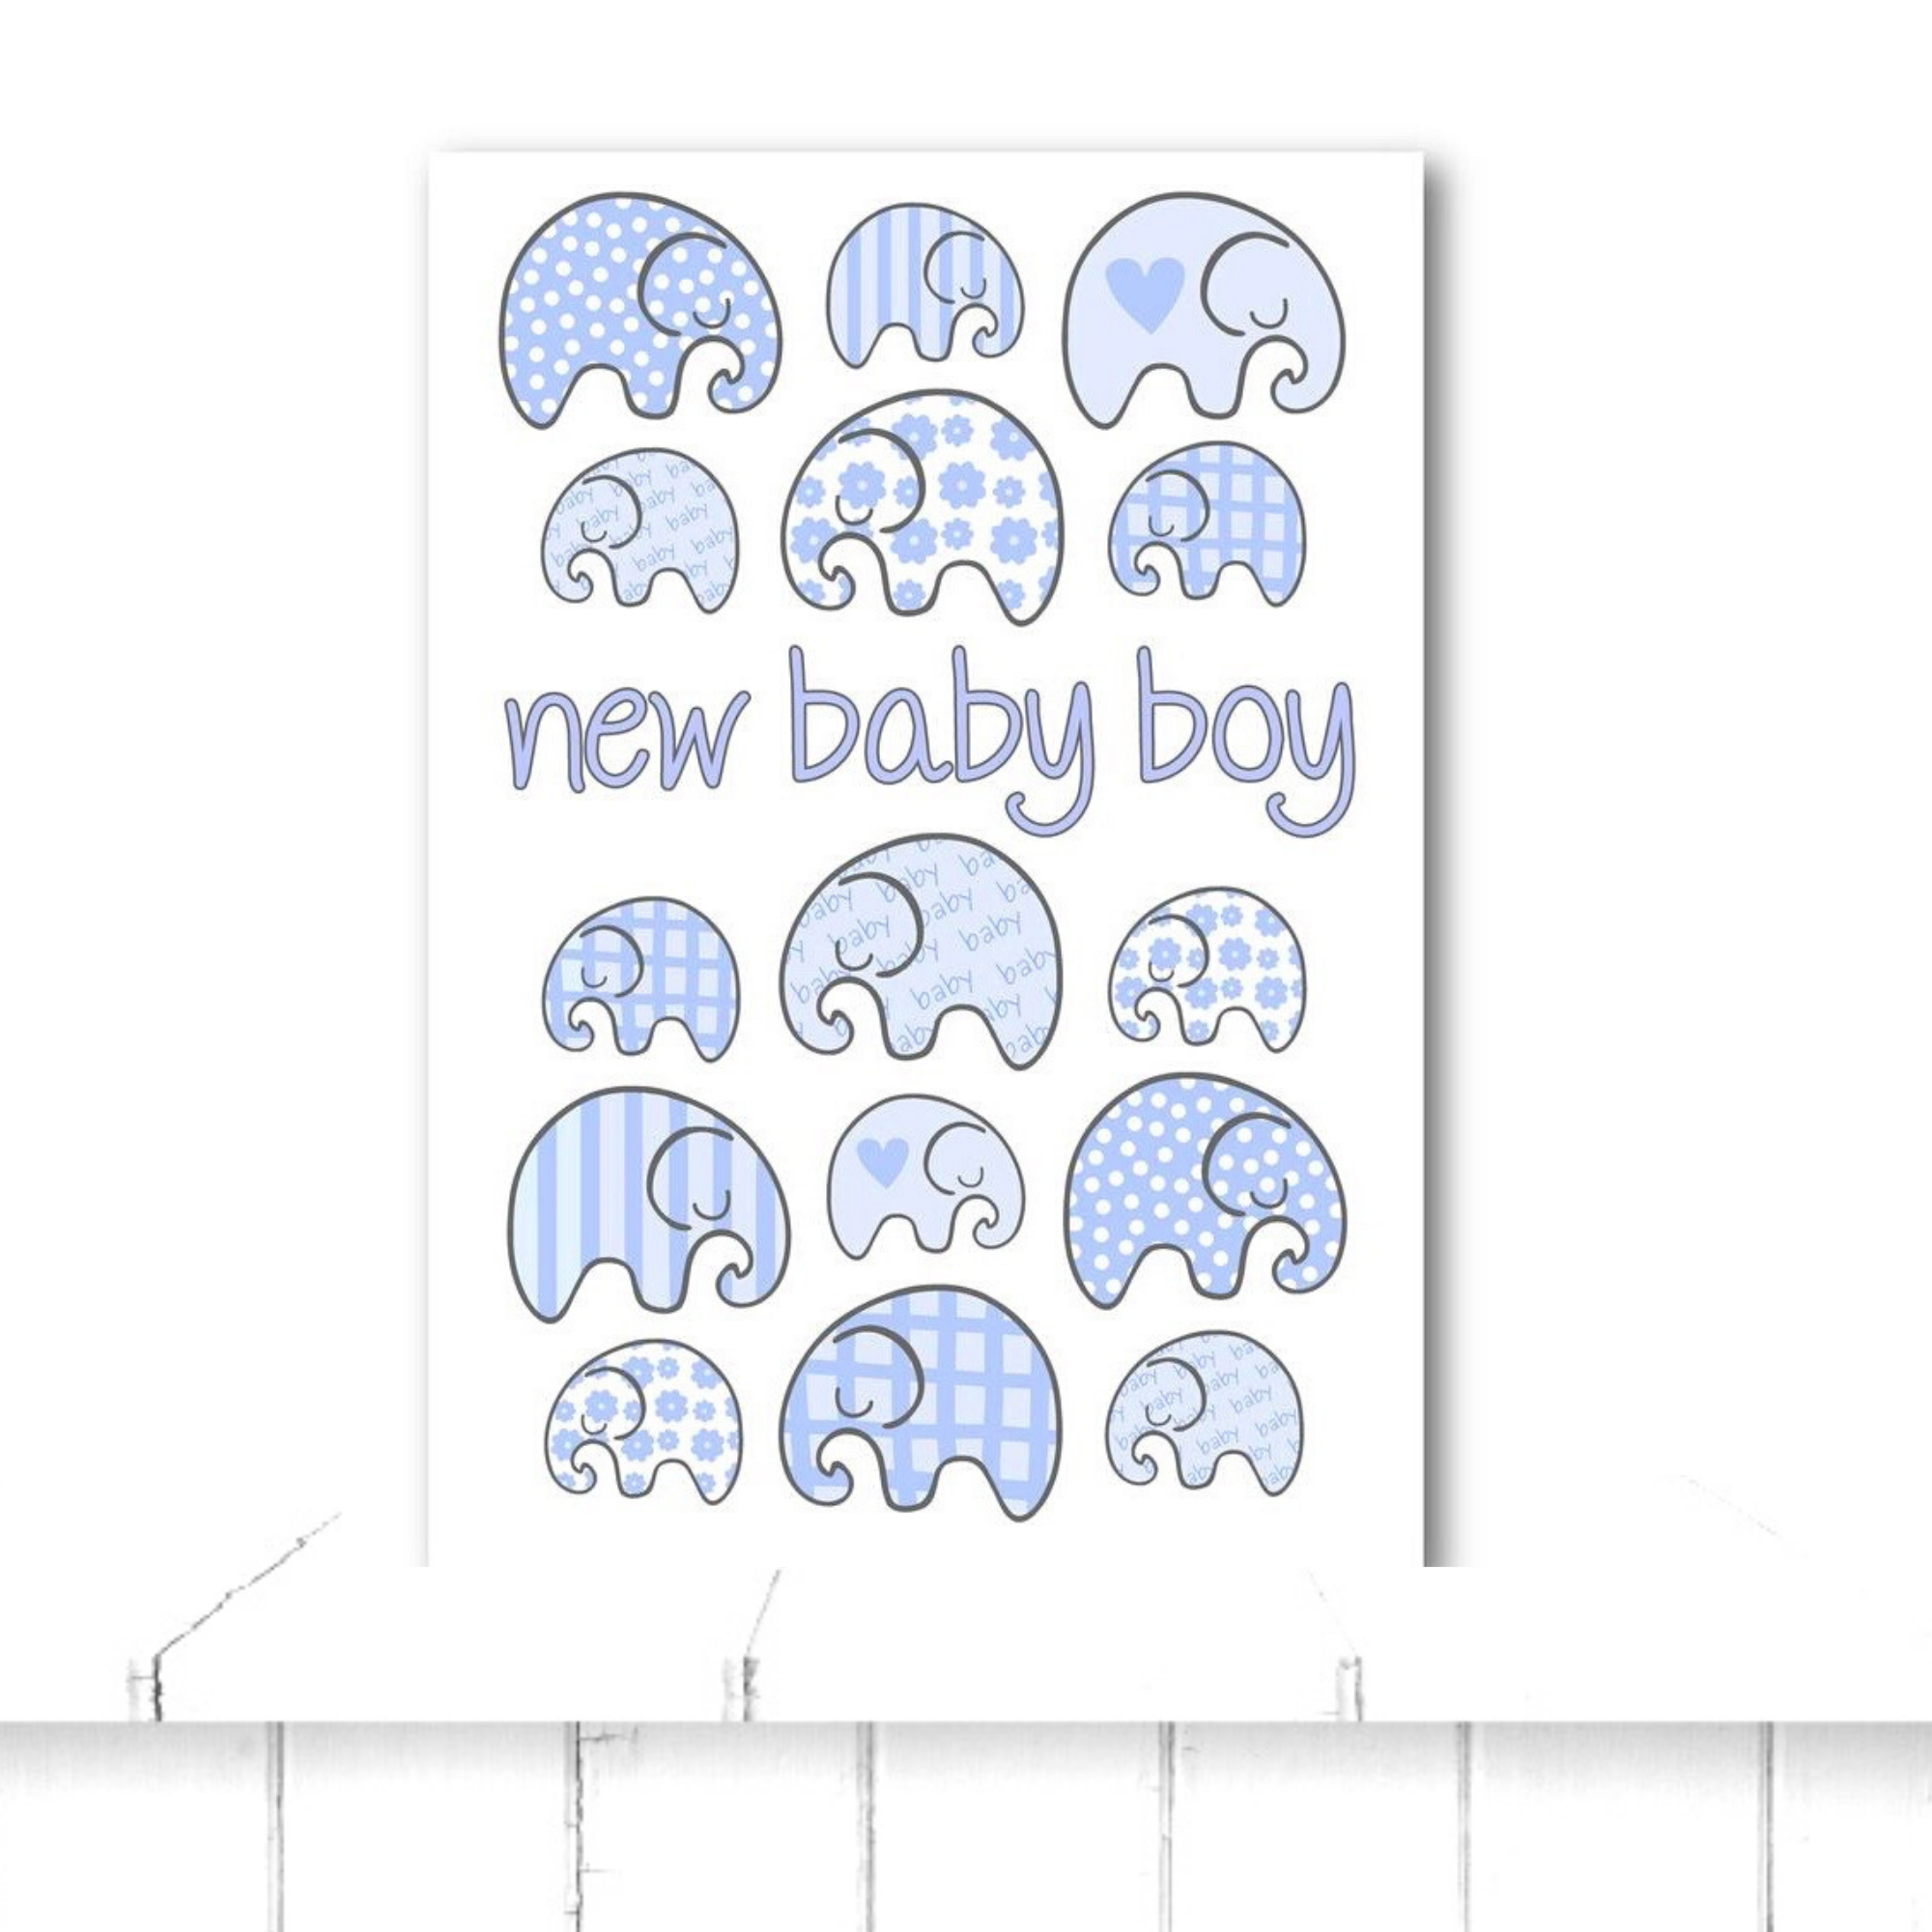 new baby boy greetings card with elephants